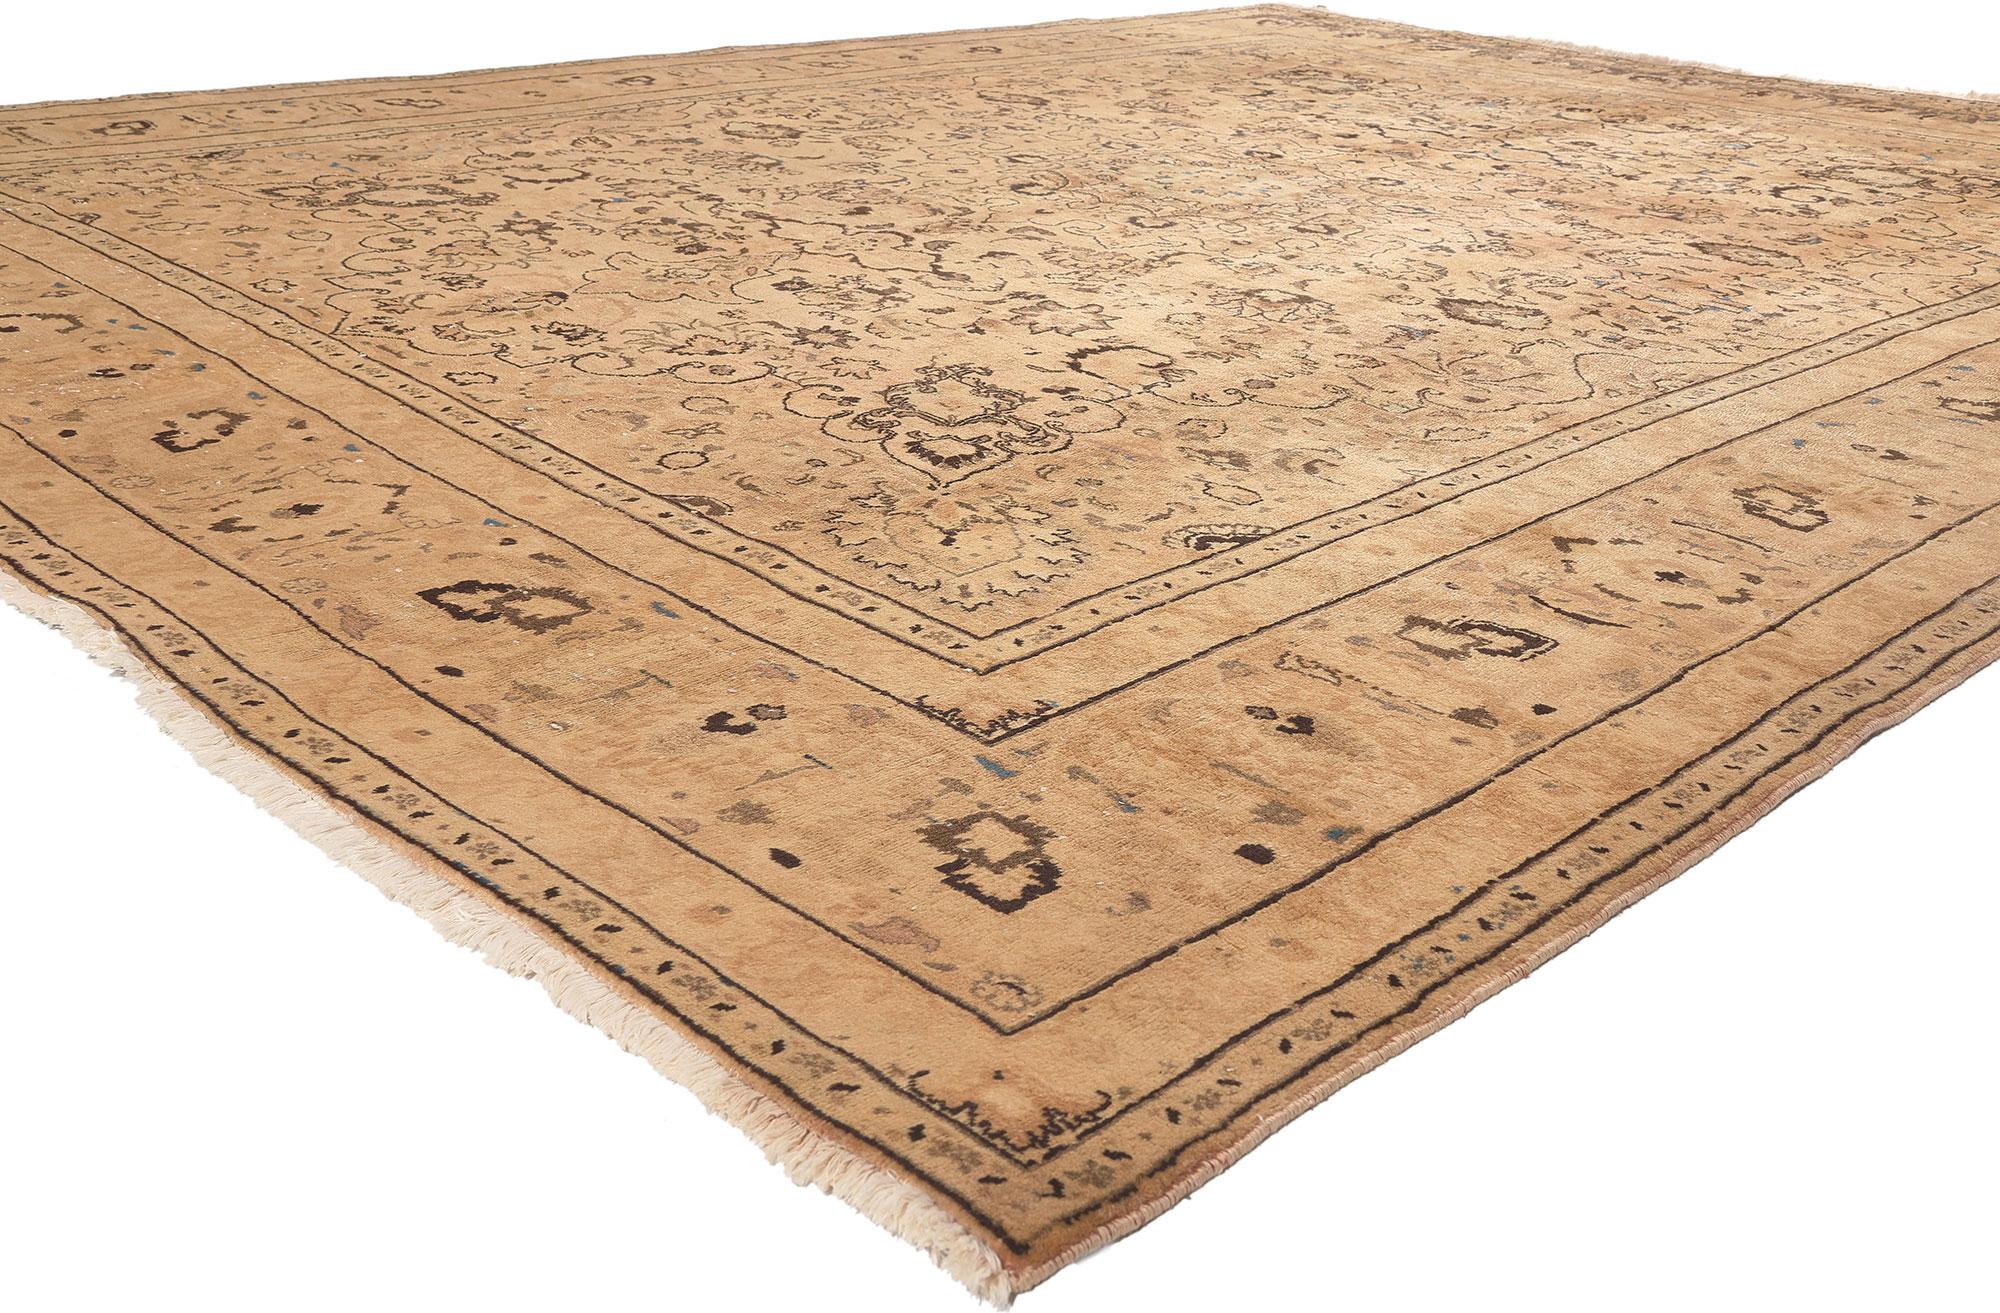 76445 Vintage Persian Khorassan Rug 09'07 X 12'03. Relaxed elegance meets traditional sensibility in this hand knotted vintage Persian Khorassan rug. The decorative floral design and neutral earthy hues woven into this piece work together resulting